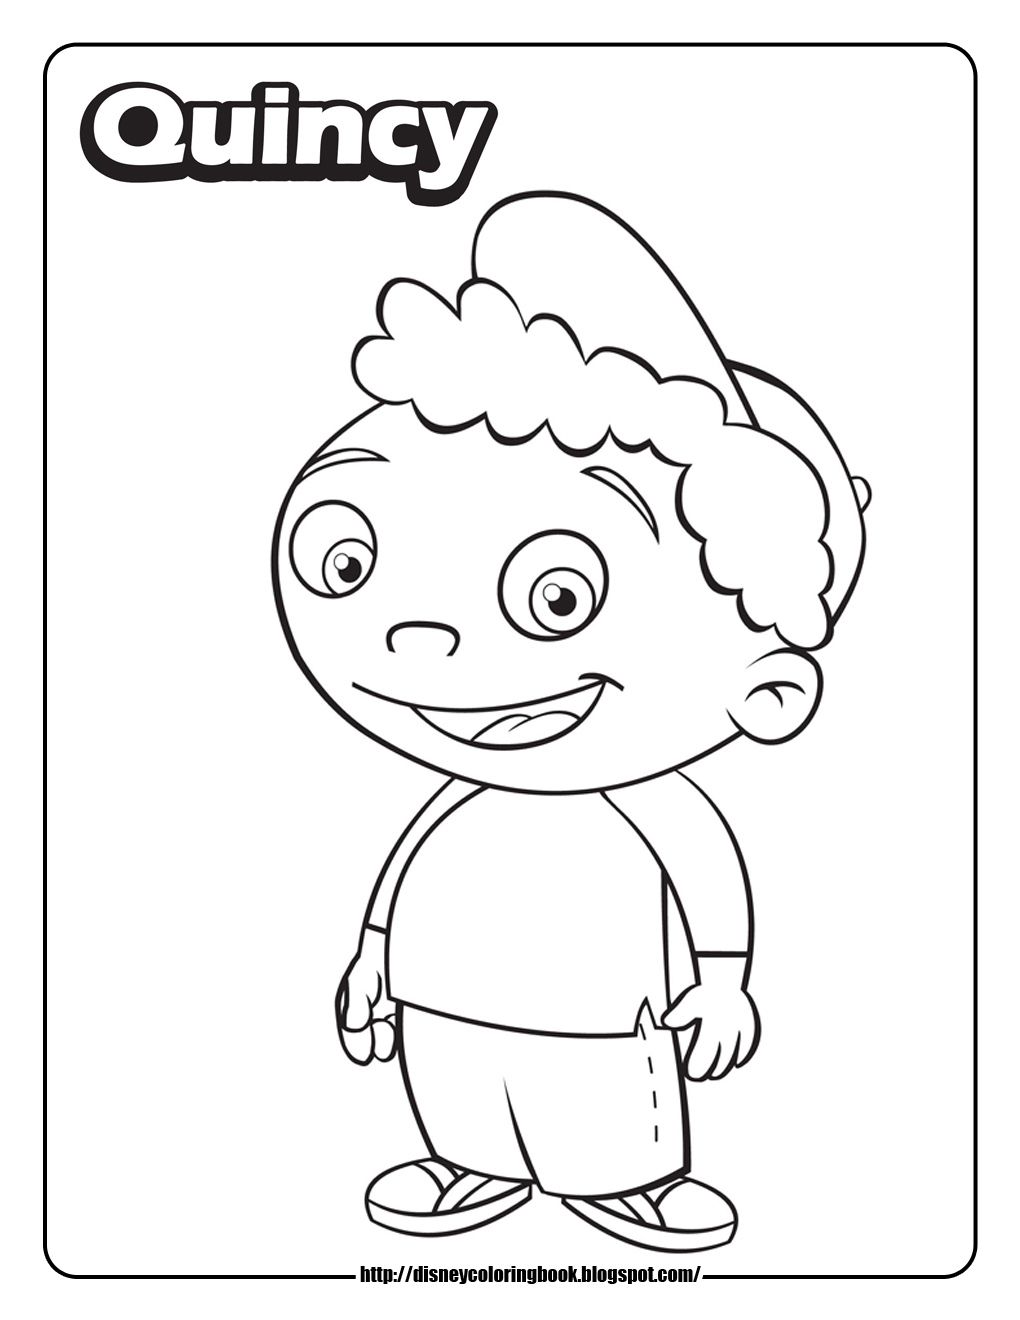 Disney Coloring Pages and Sheets for Kids: Little Einsteins 3: Free Disney  Coloring … | Doc mcstuffins coloring pages, Disney coloring sheets, Toddler coloring  book